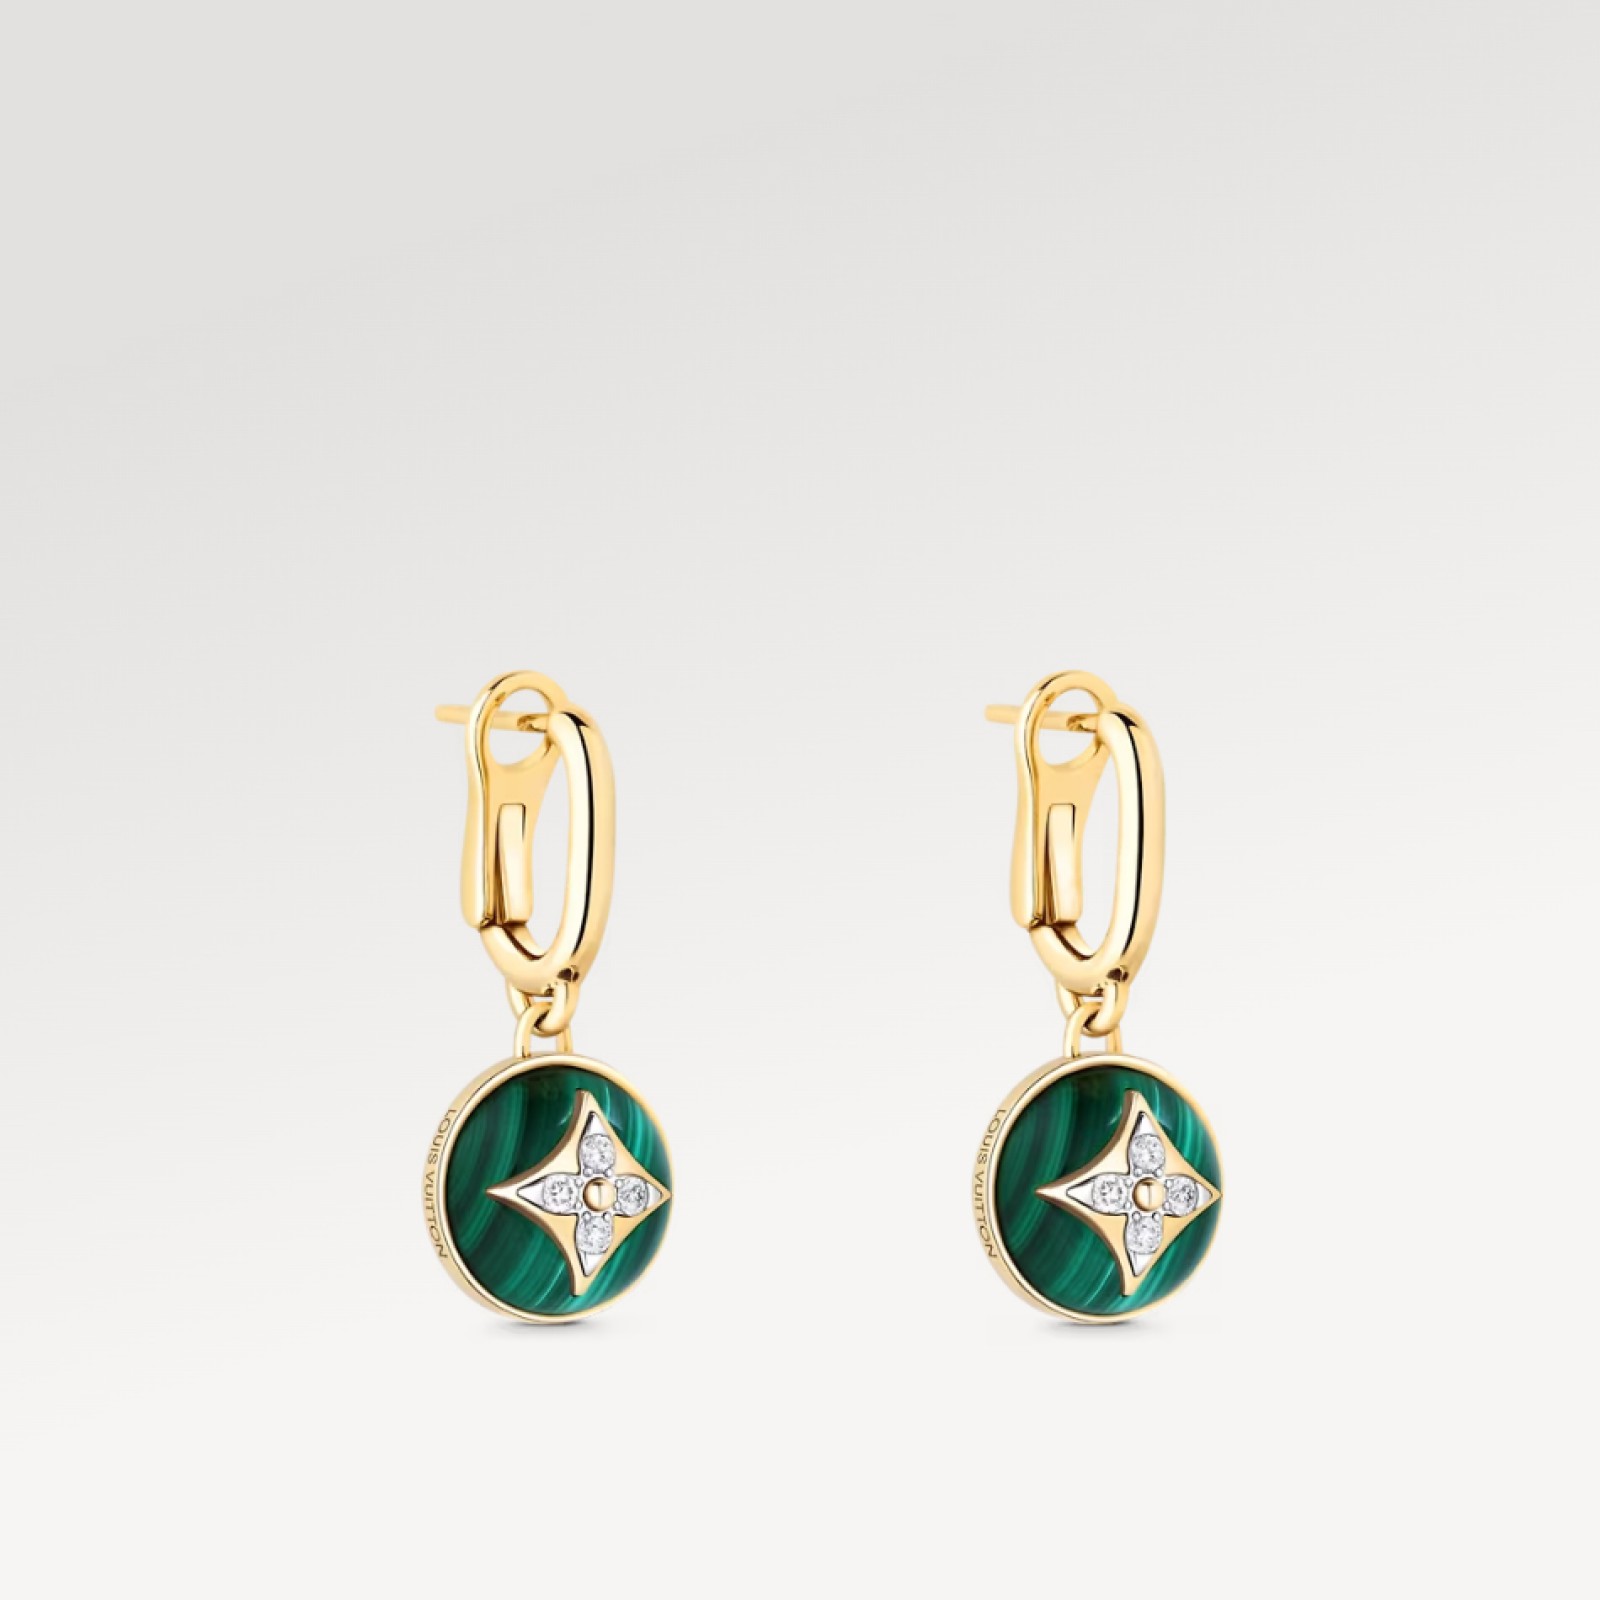 Color Blossom Earrings, Yellow Gold, White Gold, Malachite And Diamonds